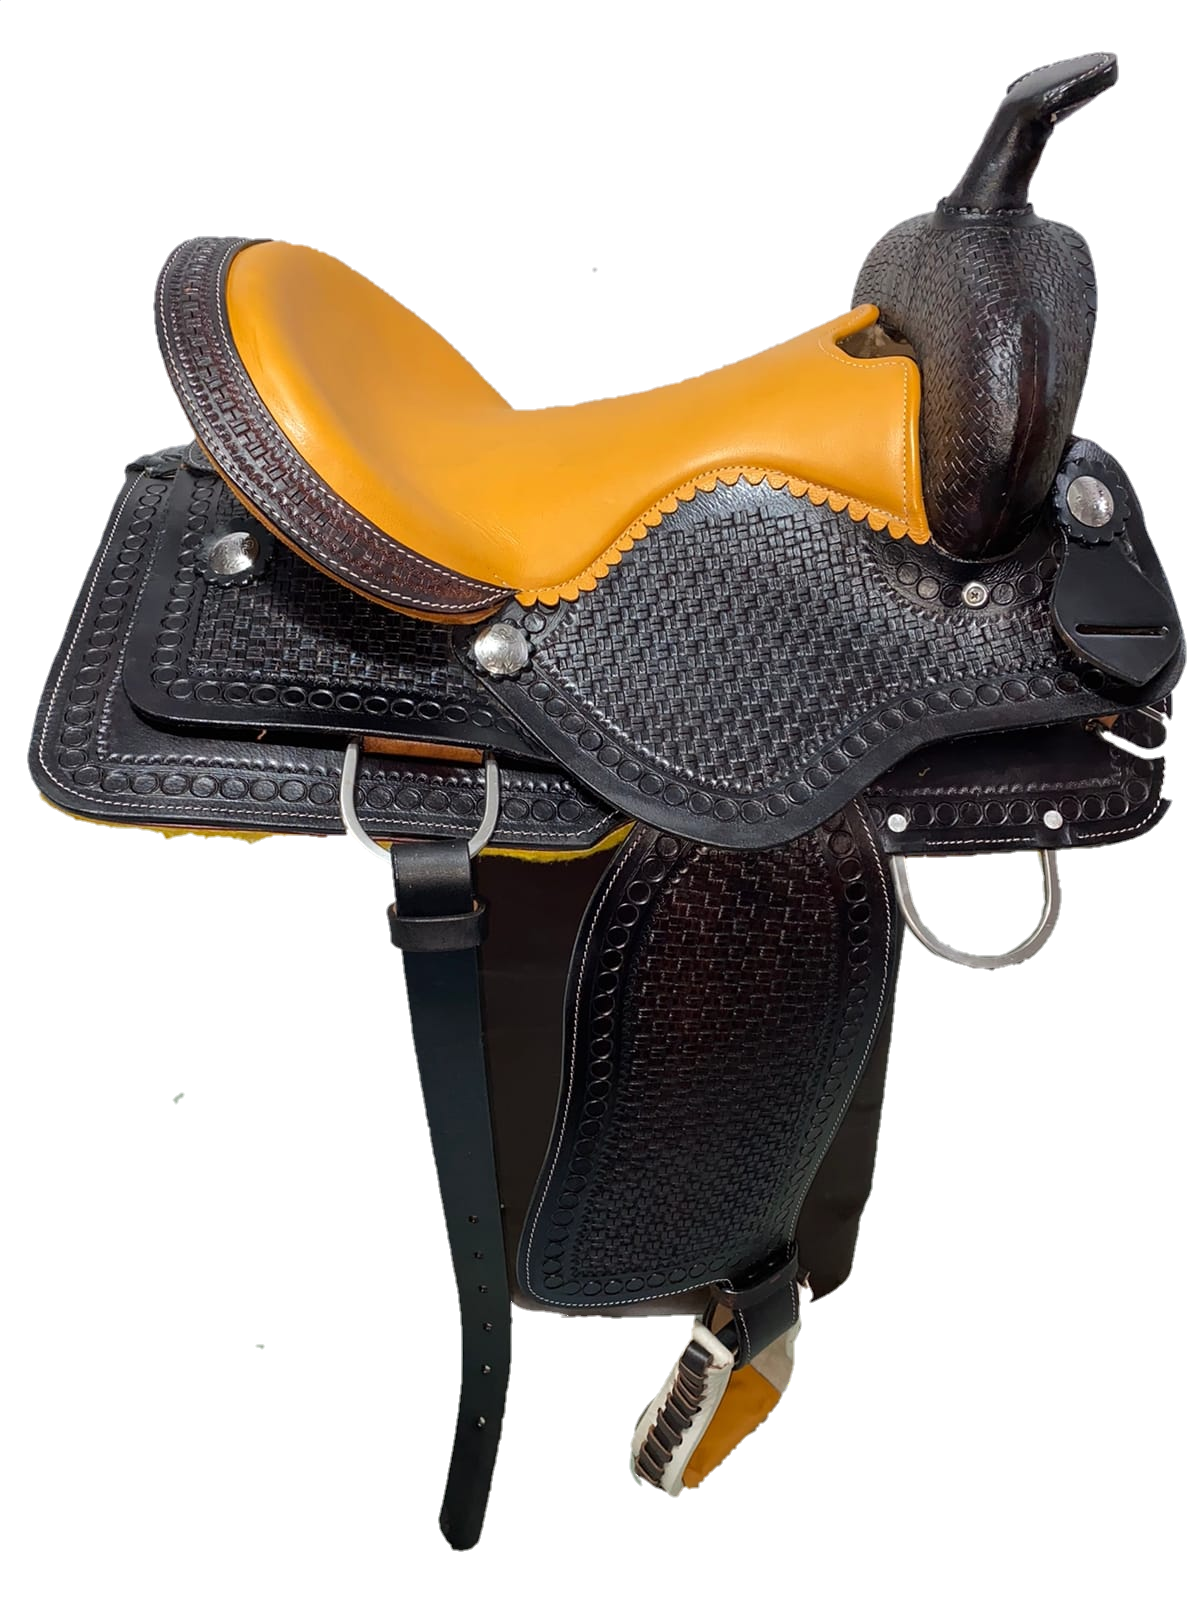 Lussoro Classic Quality Premium Leather Western Barrel Racing Trail  Equestrian Horse Saddle, Headstall, Breast Collar  REINS With Free Gift A  Saddle Pad Lussoro Horse Saddle lather saddle Khan Lussoro Classic